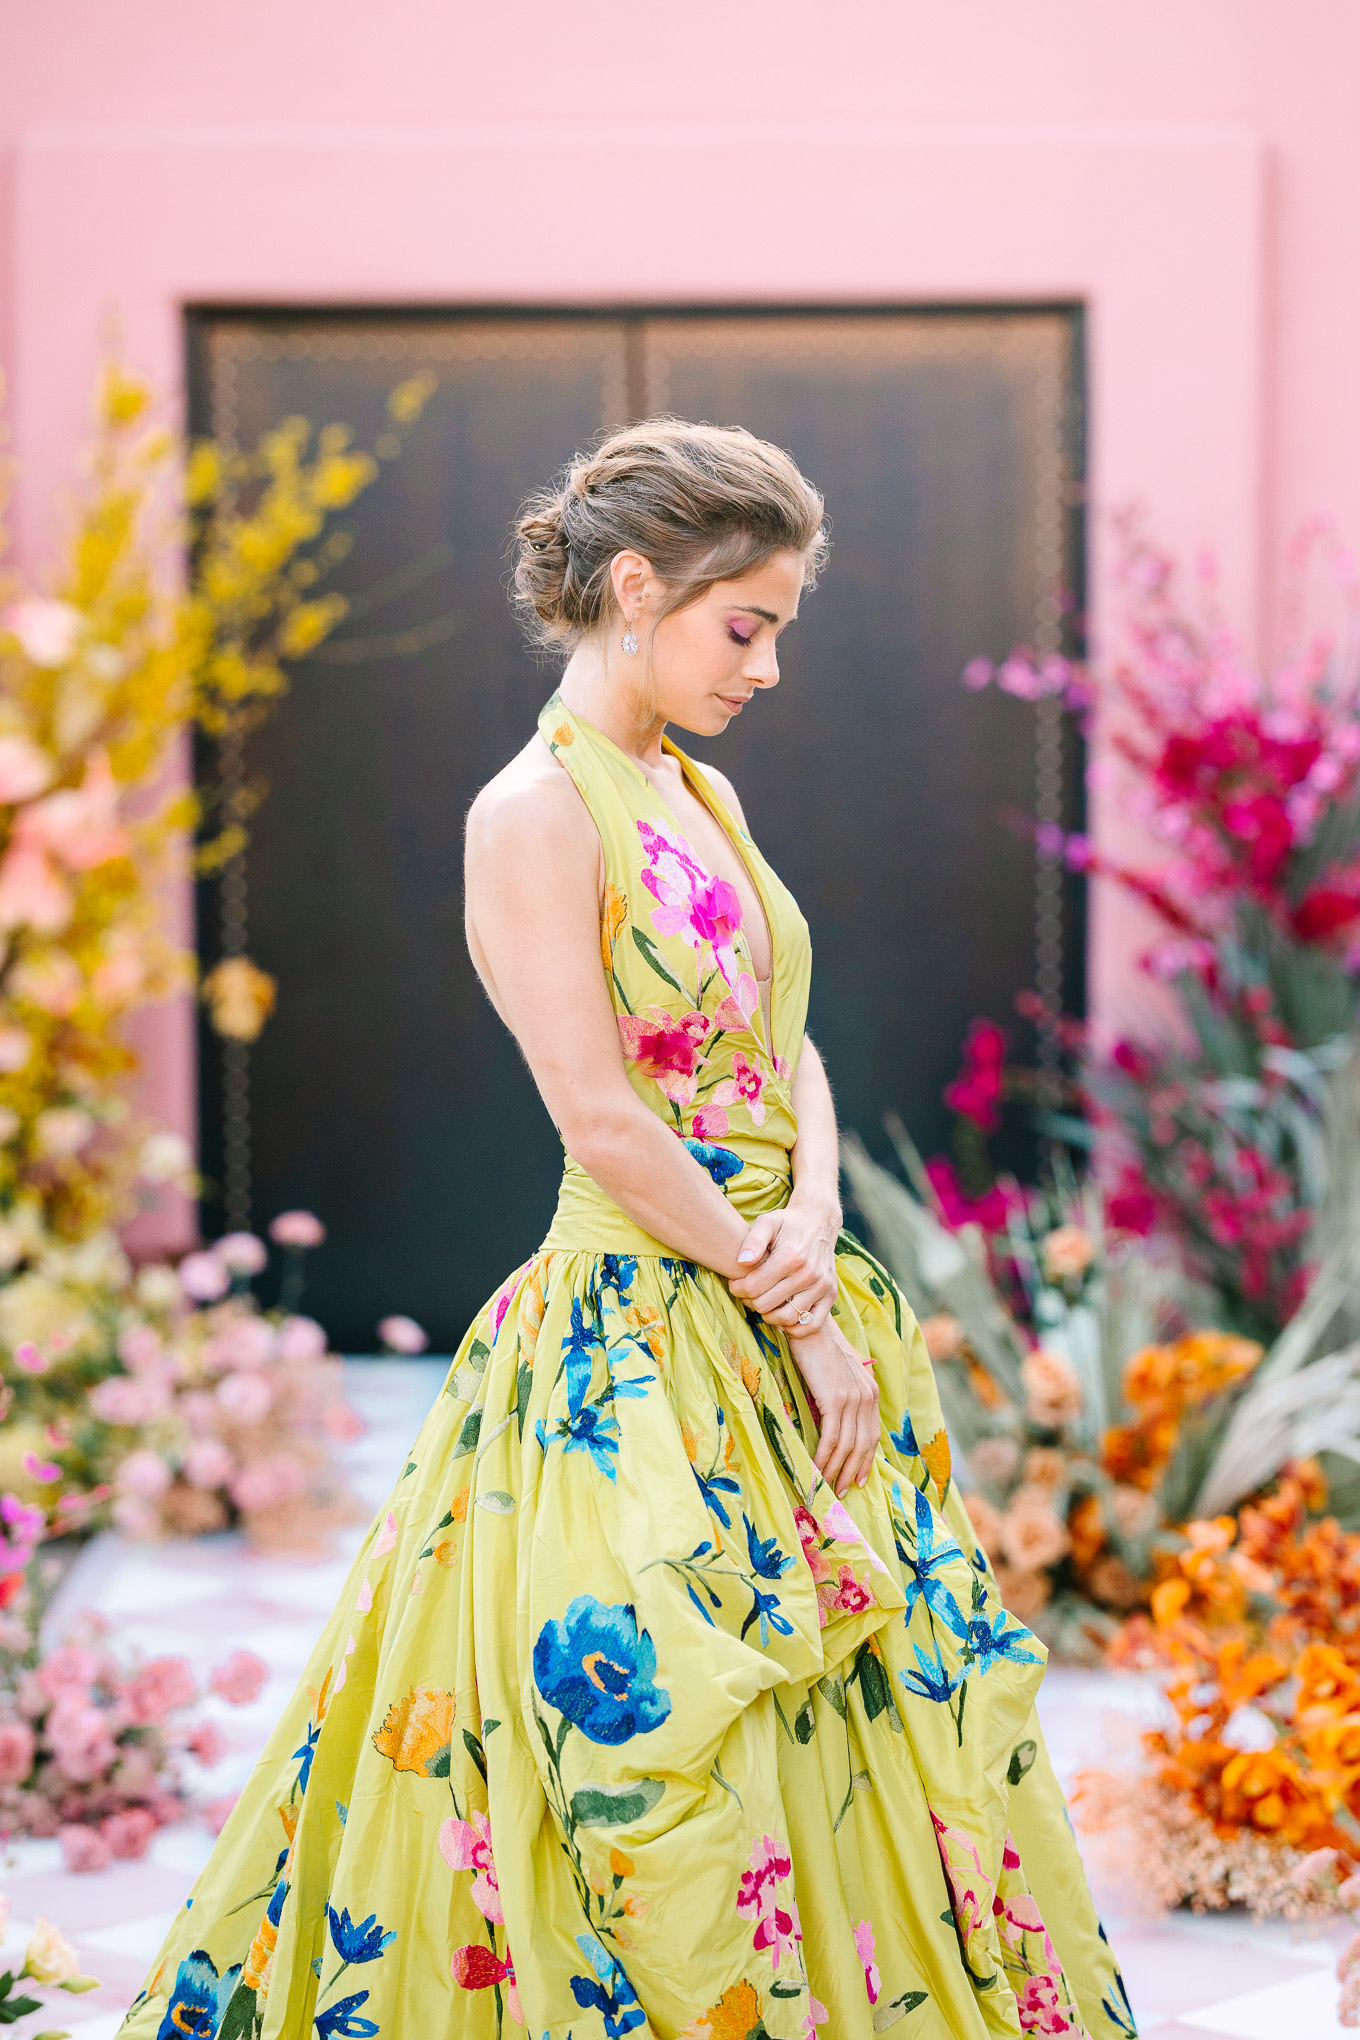 Chartreuse floral Marchesa gown on checkered runway | Kindred Presets x Mary Costa Photography Sands Hotel Ad Campaign | Colorful Palm Springs wedding photography | #palmspringsphotographer #lightroompresets #sandshotel #pinkhotel   Source: Mary Costa Photography | Los Angeles